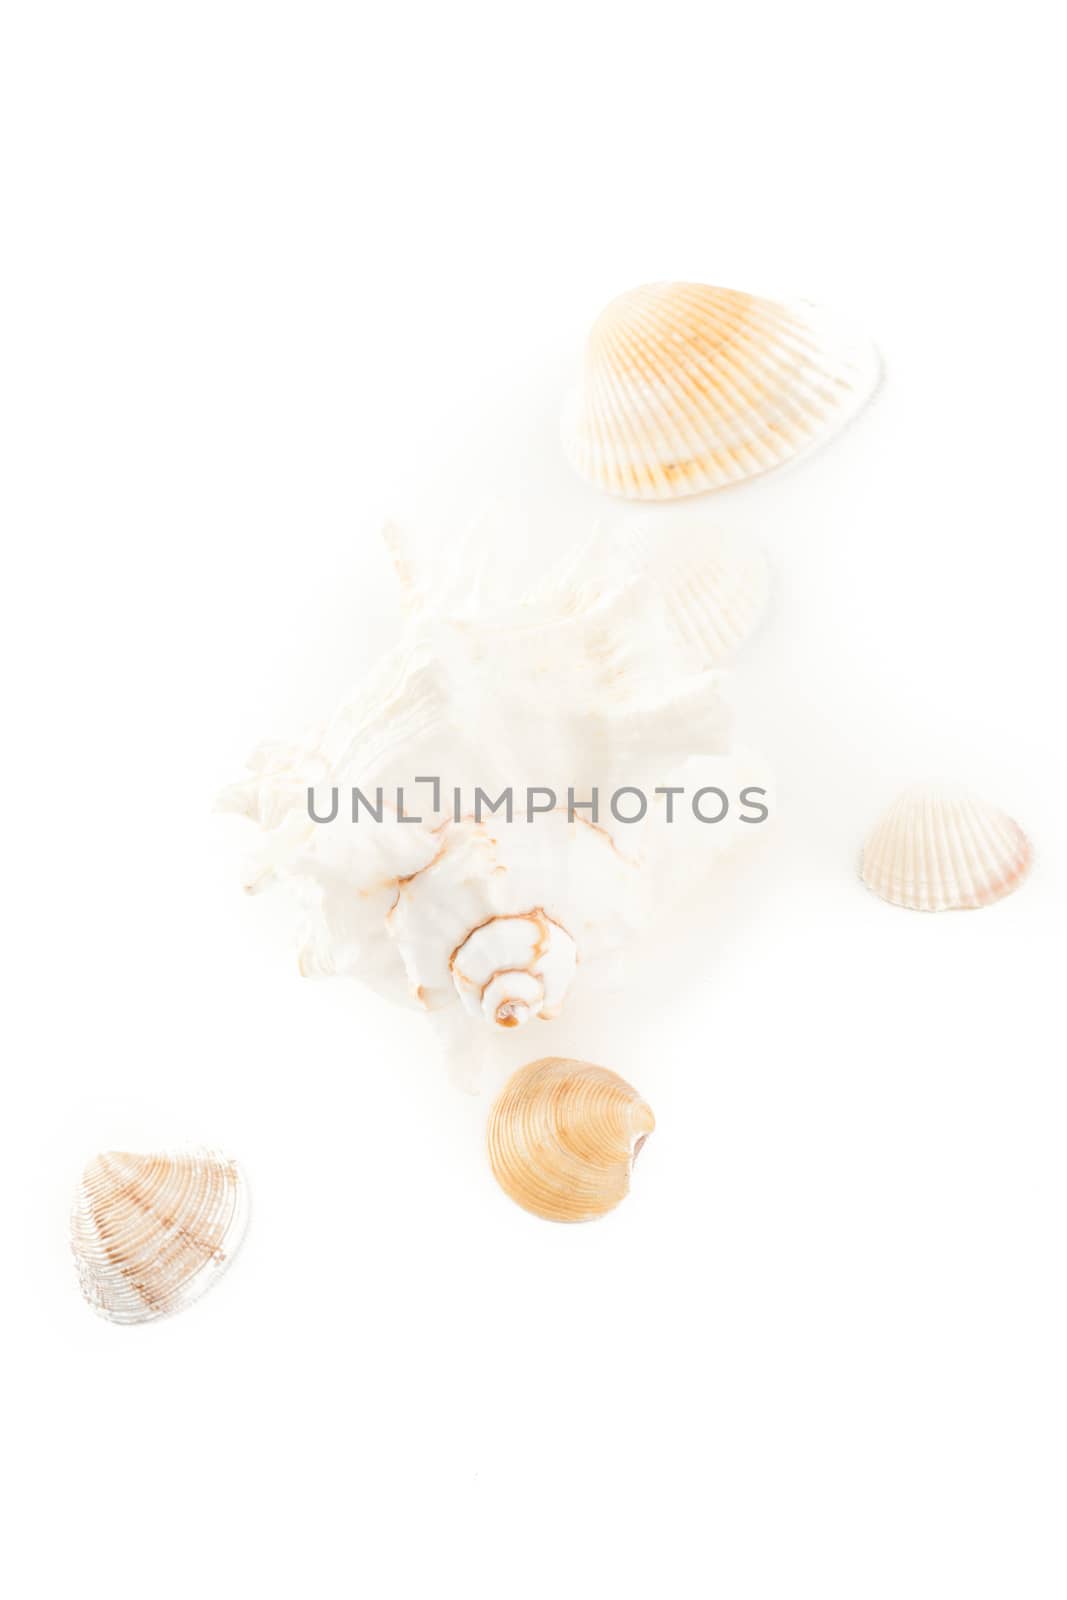 white seashell and clams by furo_felix